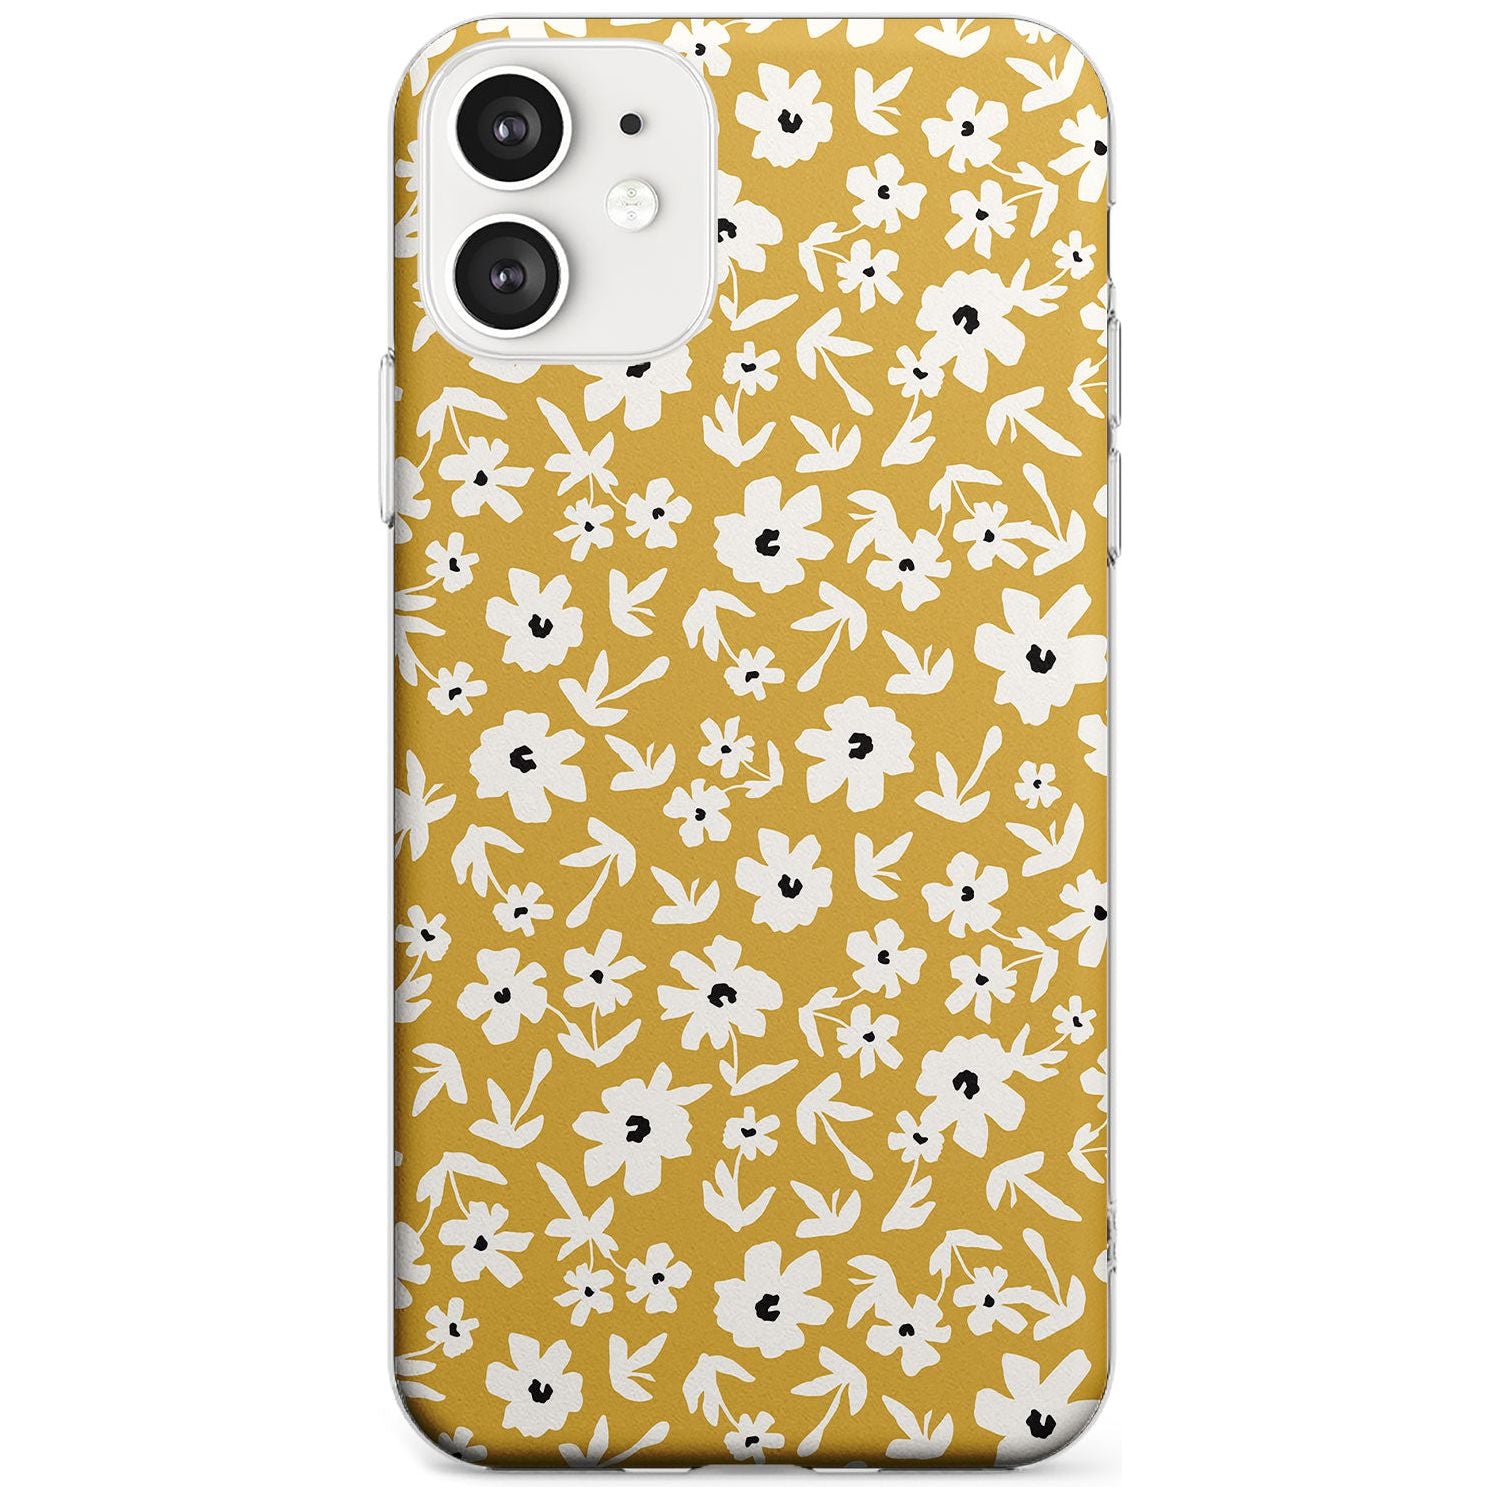 Floral Print on Mustard - Cute Floral Design Black Impact Phone Case for iPhone 11